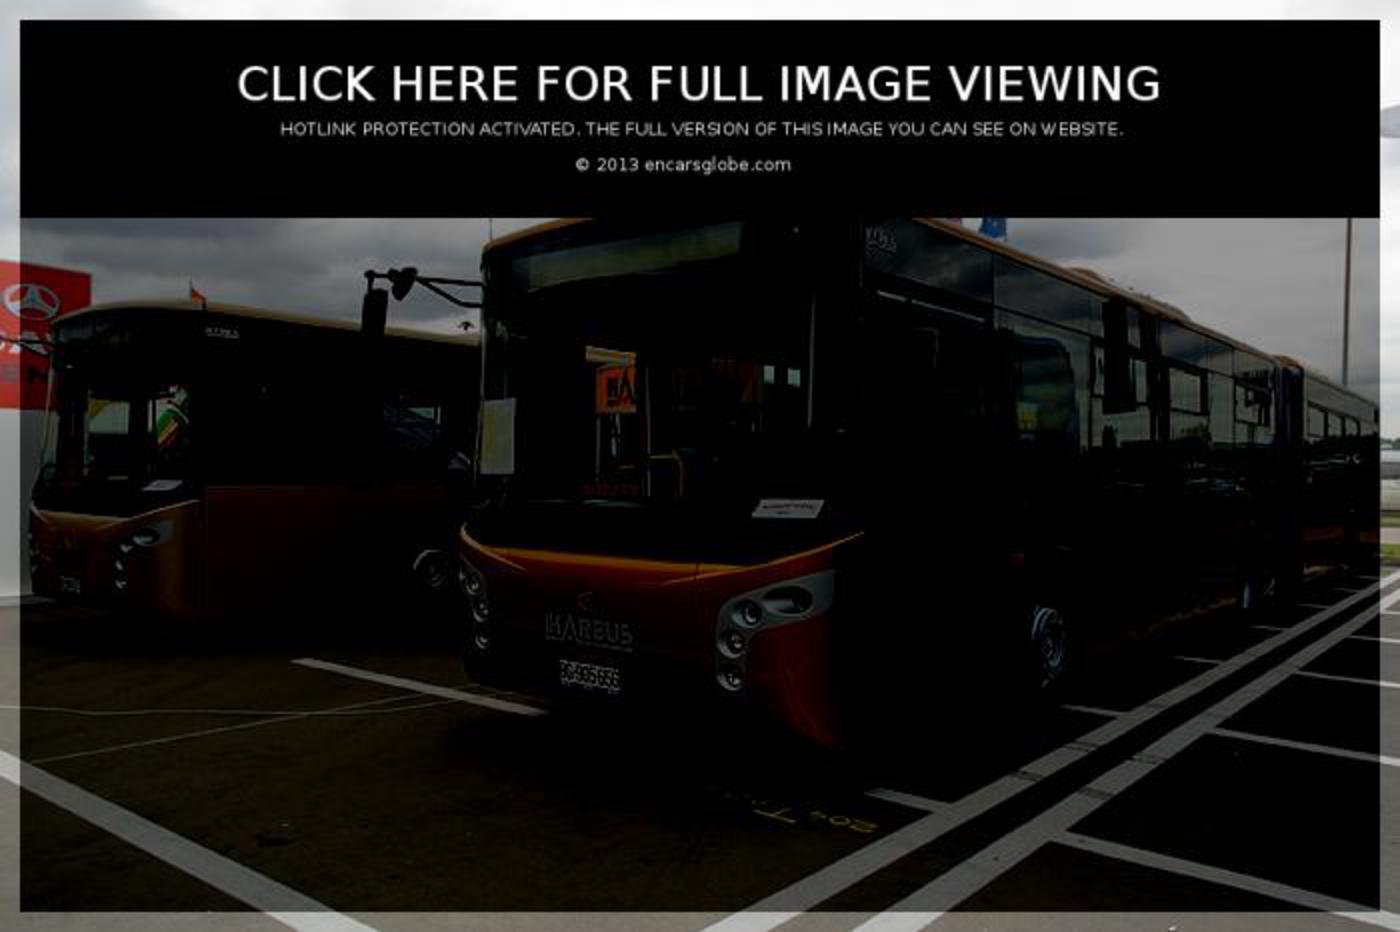 IKARBUS IK-112: Photo gallery, complete information about model ...